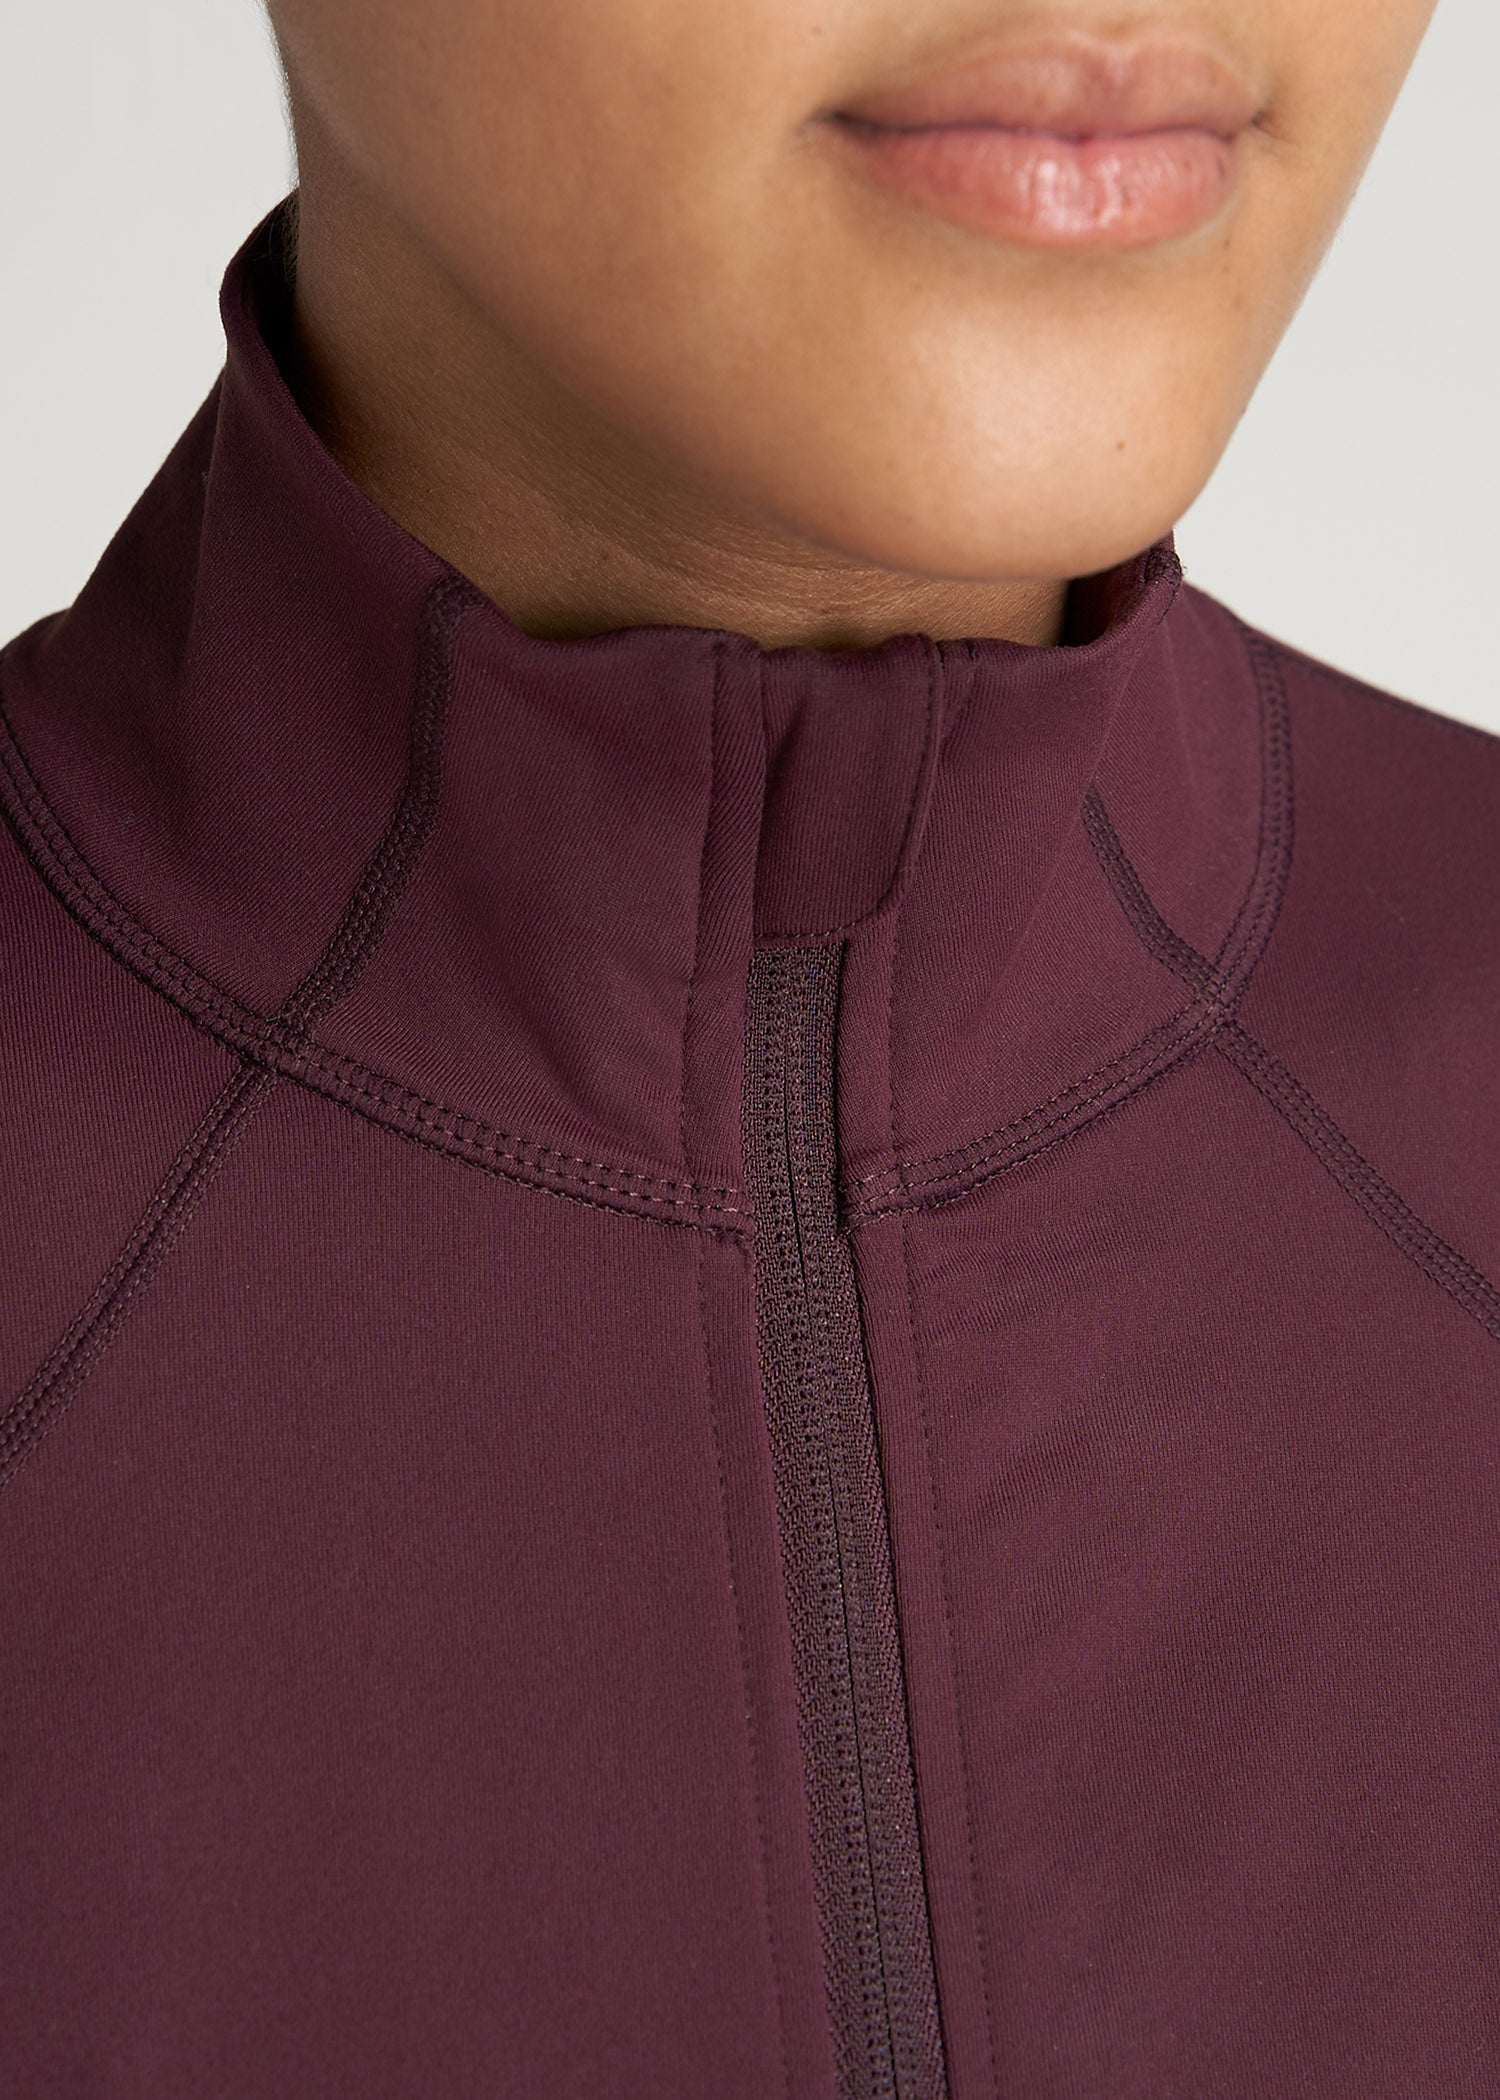 Women's Tall Warm-Up Jacket In Beetroot